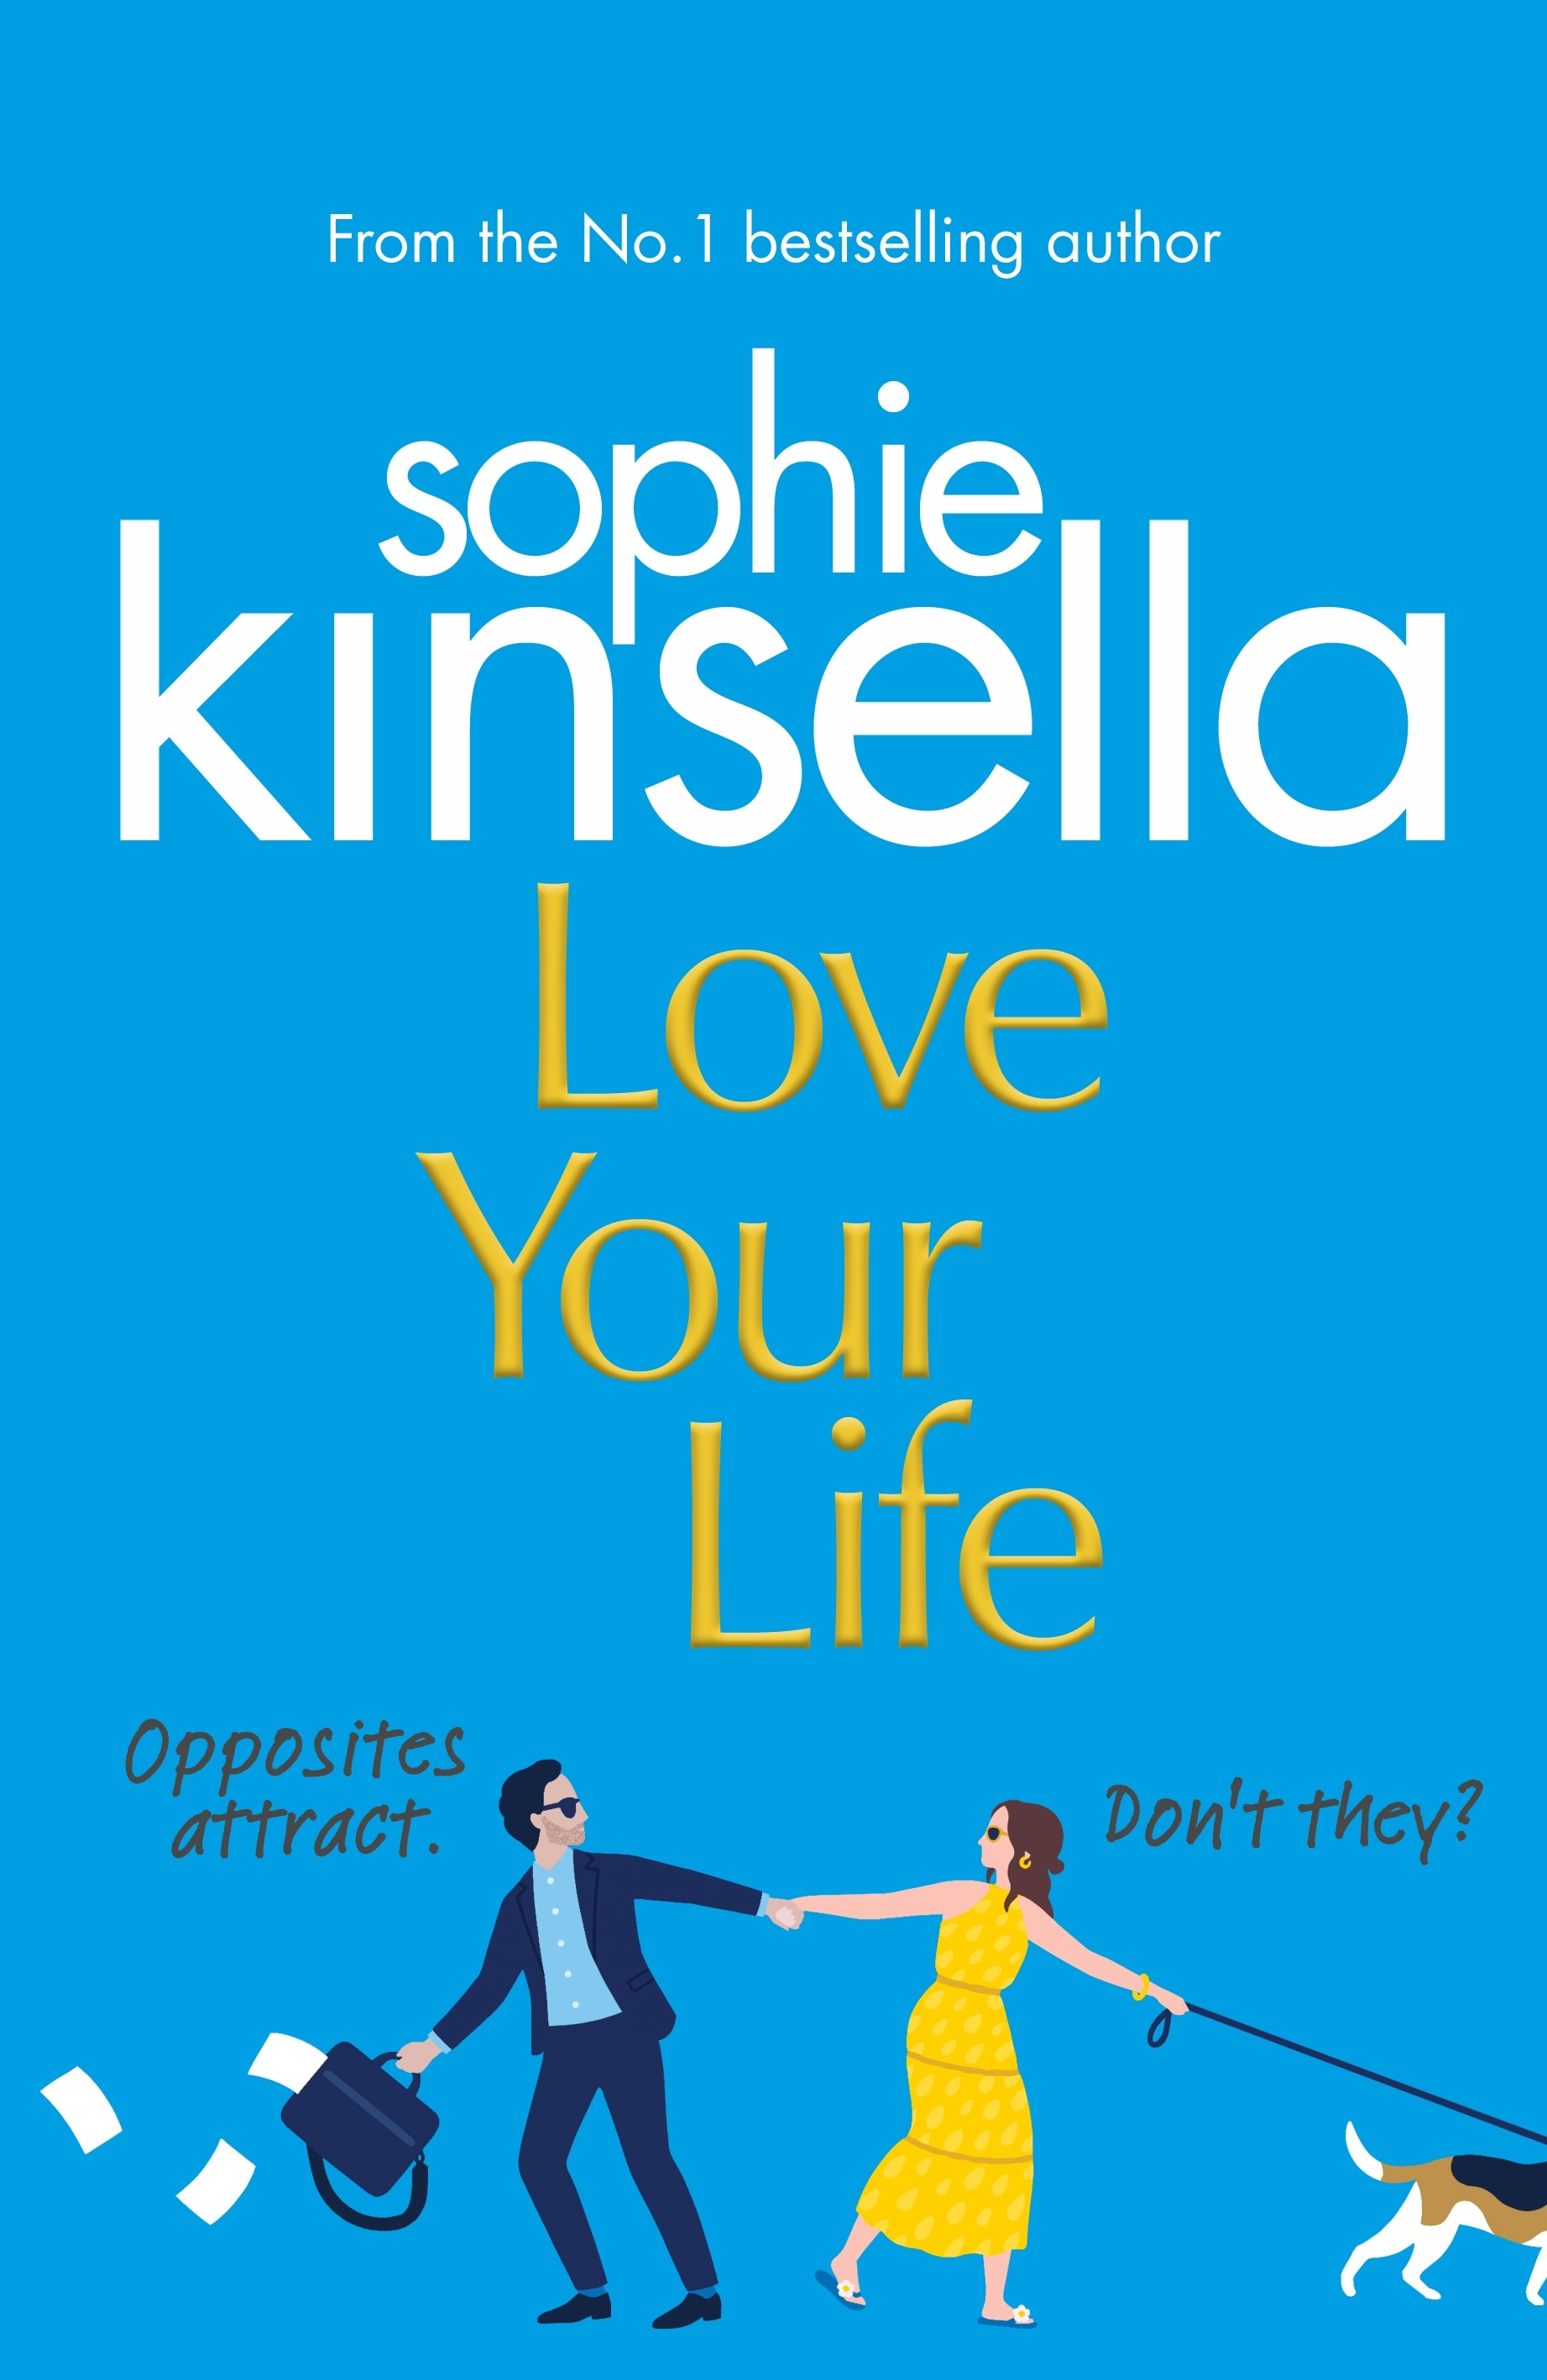 Book “Love Your Life” by Sophie Kinsella — October 29, 2020